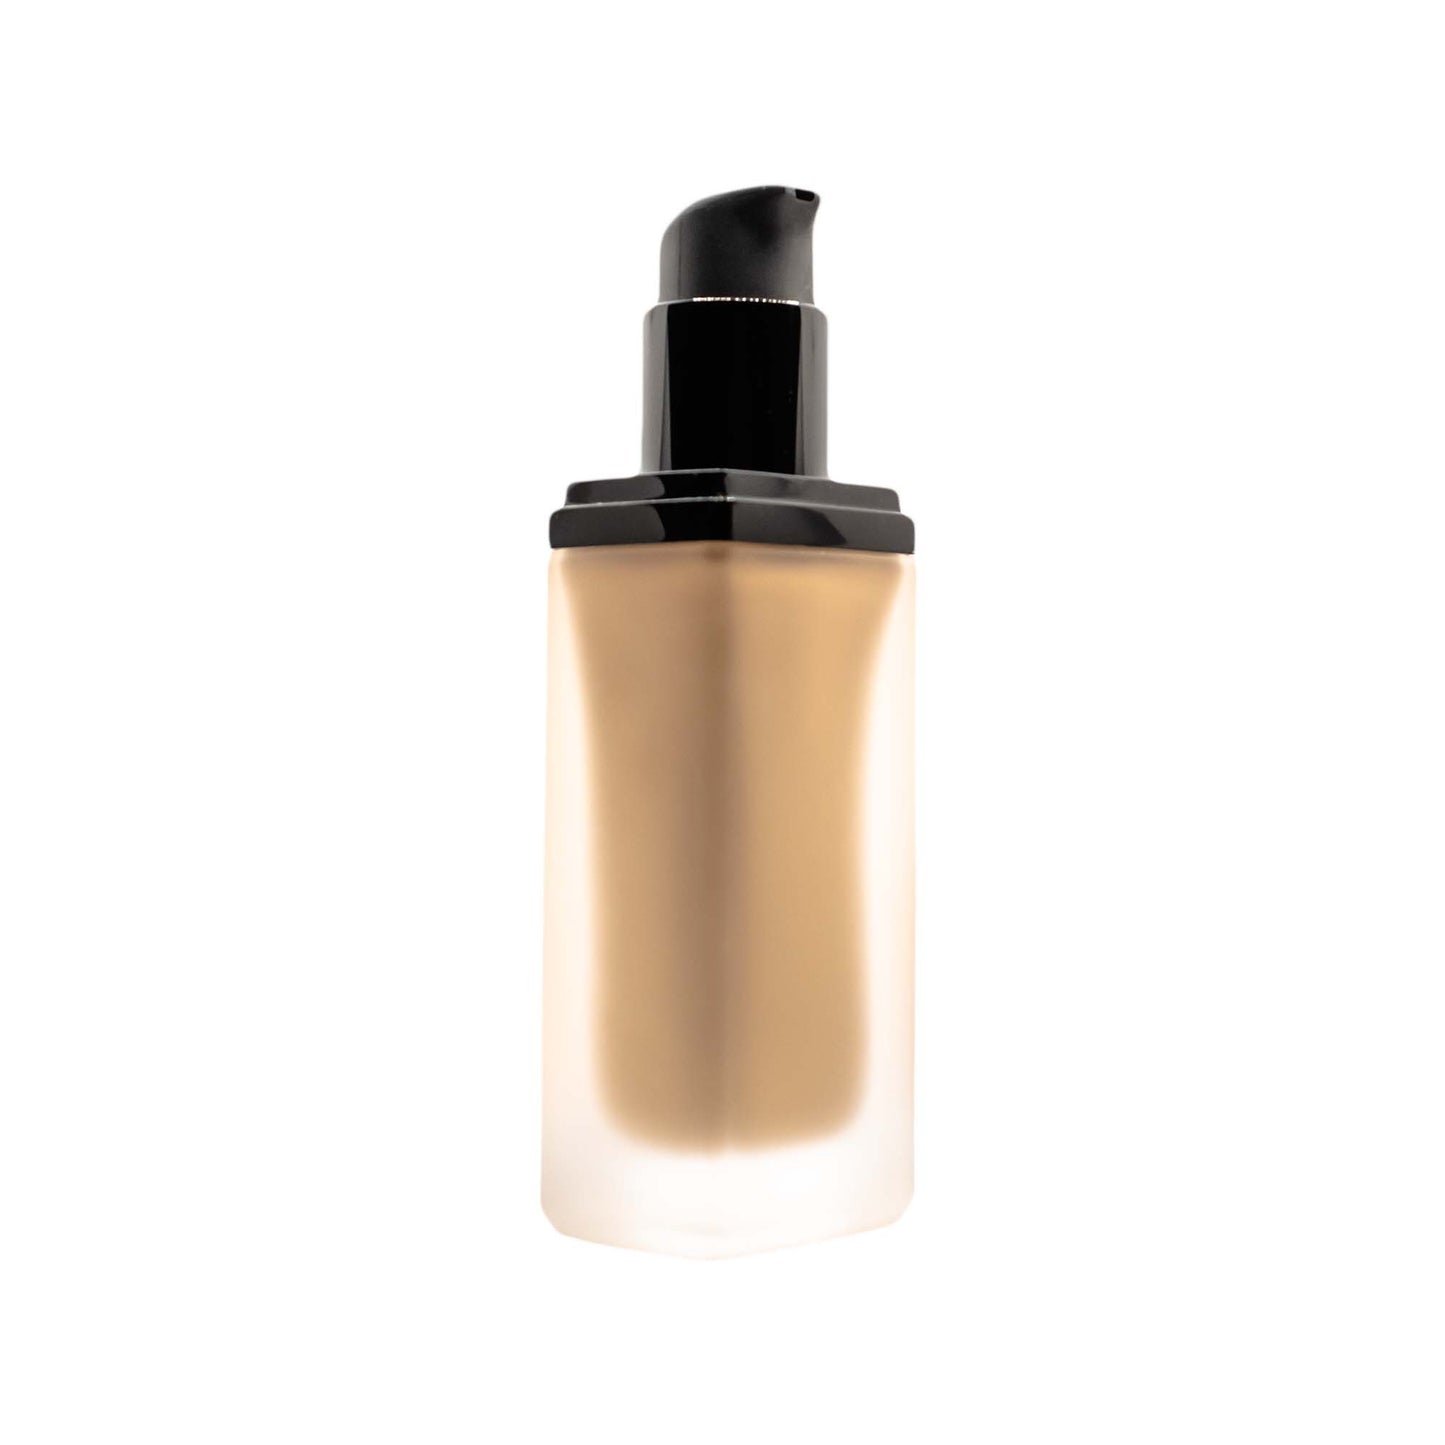 Cruisin Organics Marigold Foundation is designed to leave your skin looking flawless and luminous. Its lightweight formula ensures that your skin feels comfortable throughout the day, without any heavy or cakey feeling.